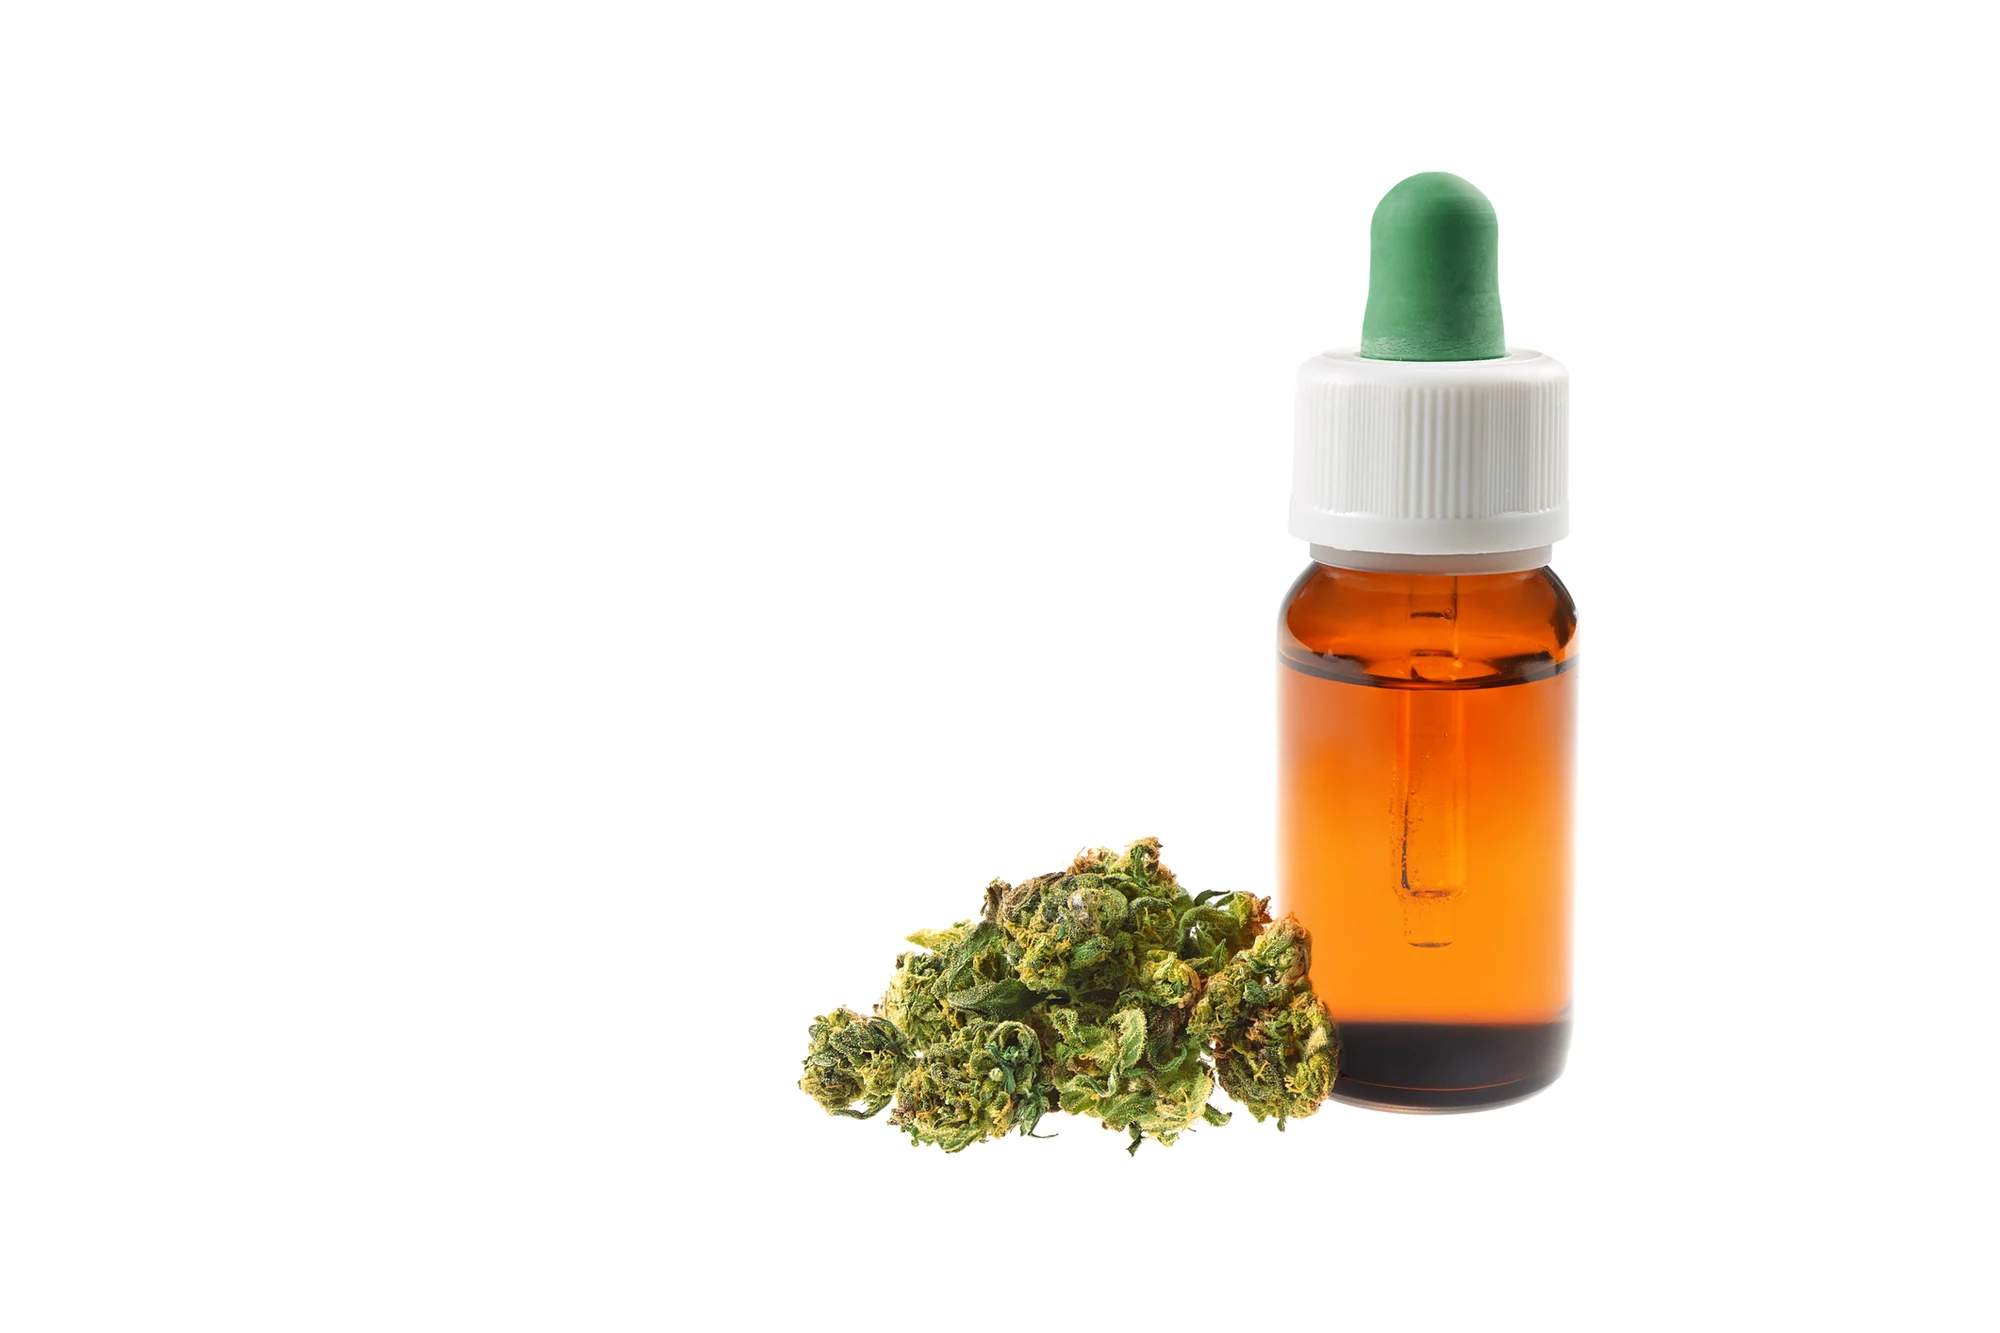 WHAT IS CBD OIL, AND SHOULD YOU USE IT?